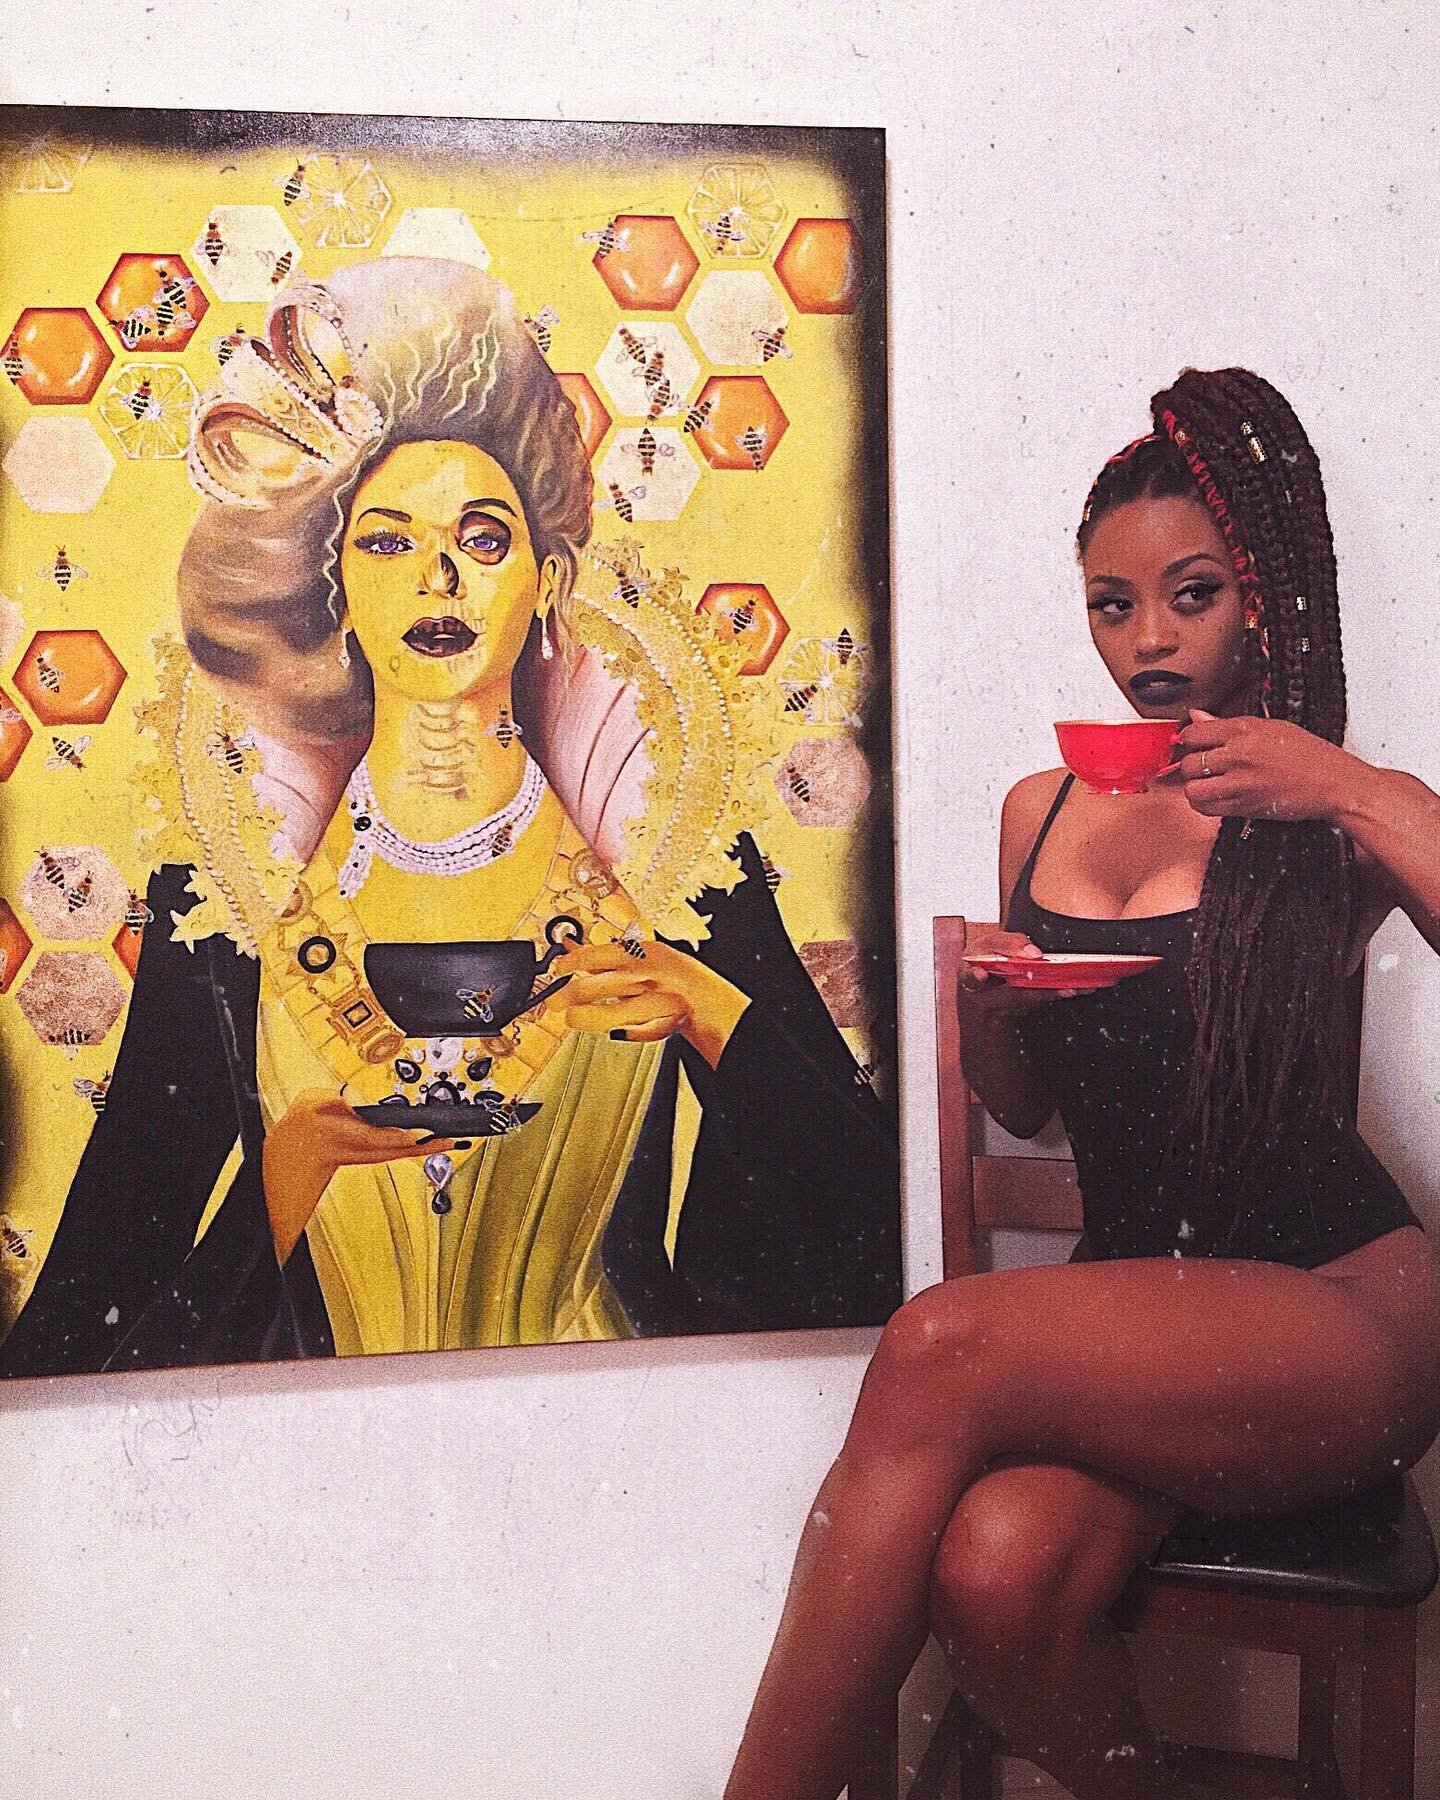 Today is the day we were blessed with Beyonc&eacute;. #BeyDay

&bull;
&bull;
&bull;
&bull;
&bull;
#asiavondope #contemporaryarts #austinart #austinartist #austinarts #oilpaintings #oilpaintingart #maximalism #femaleartist #femaleartistofinstagram #st